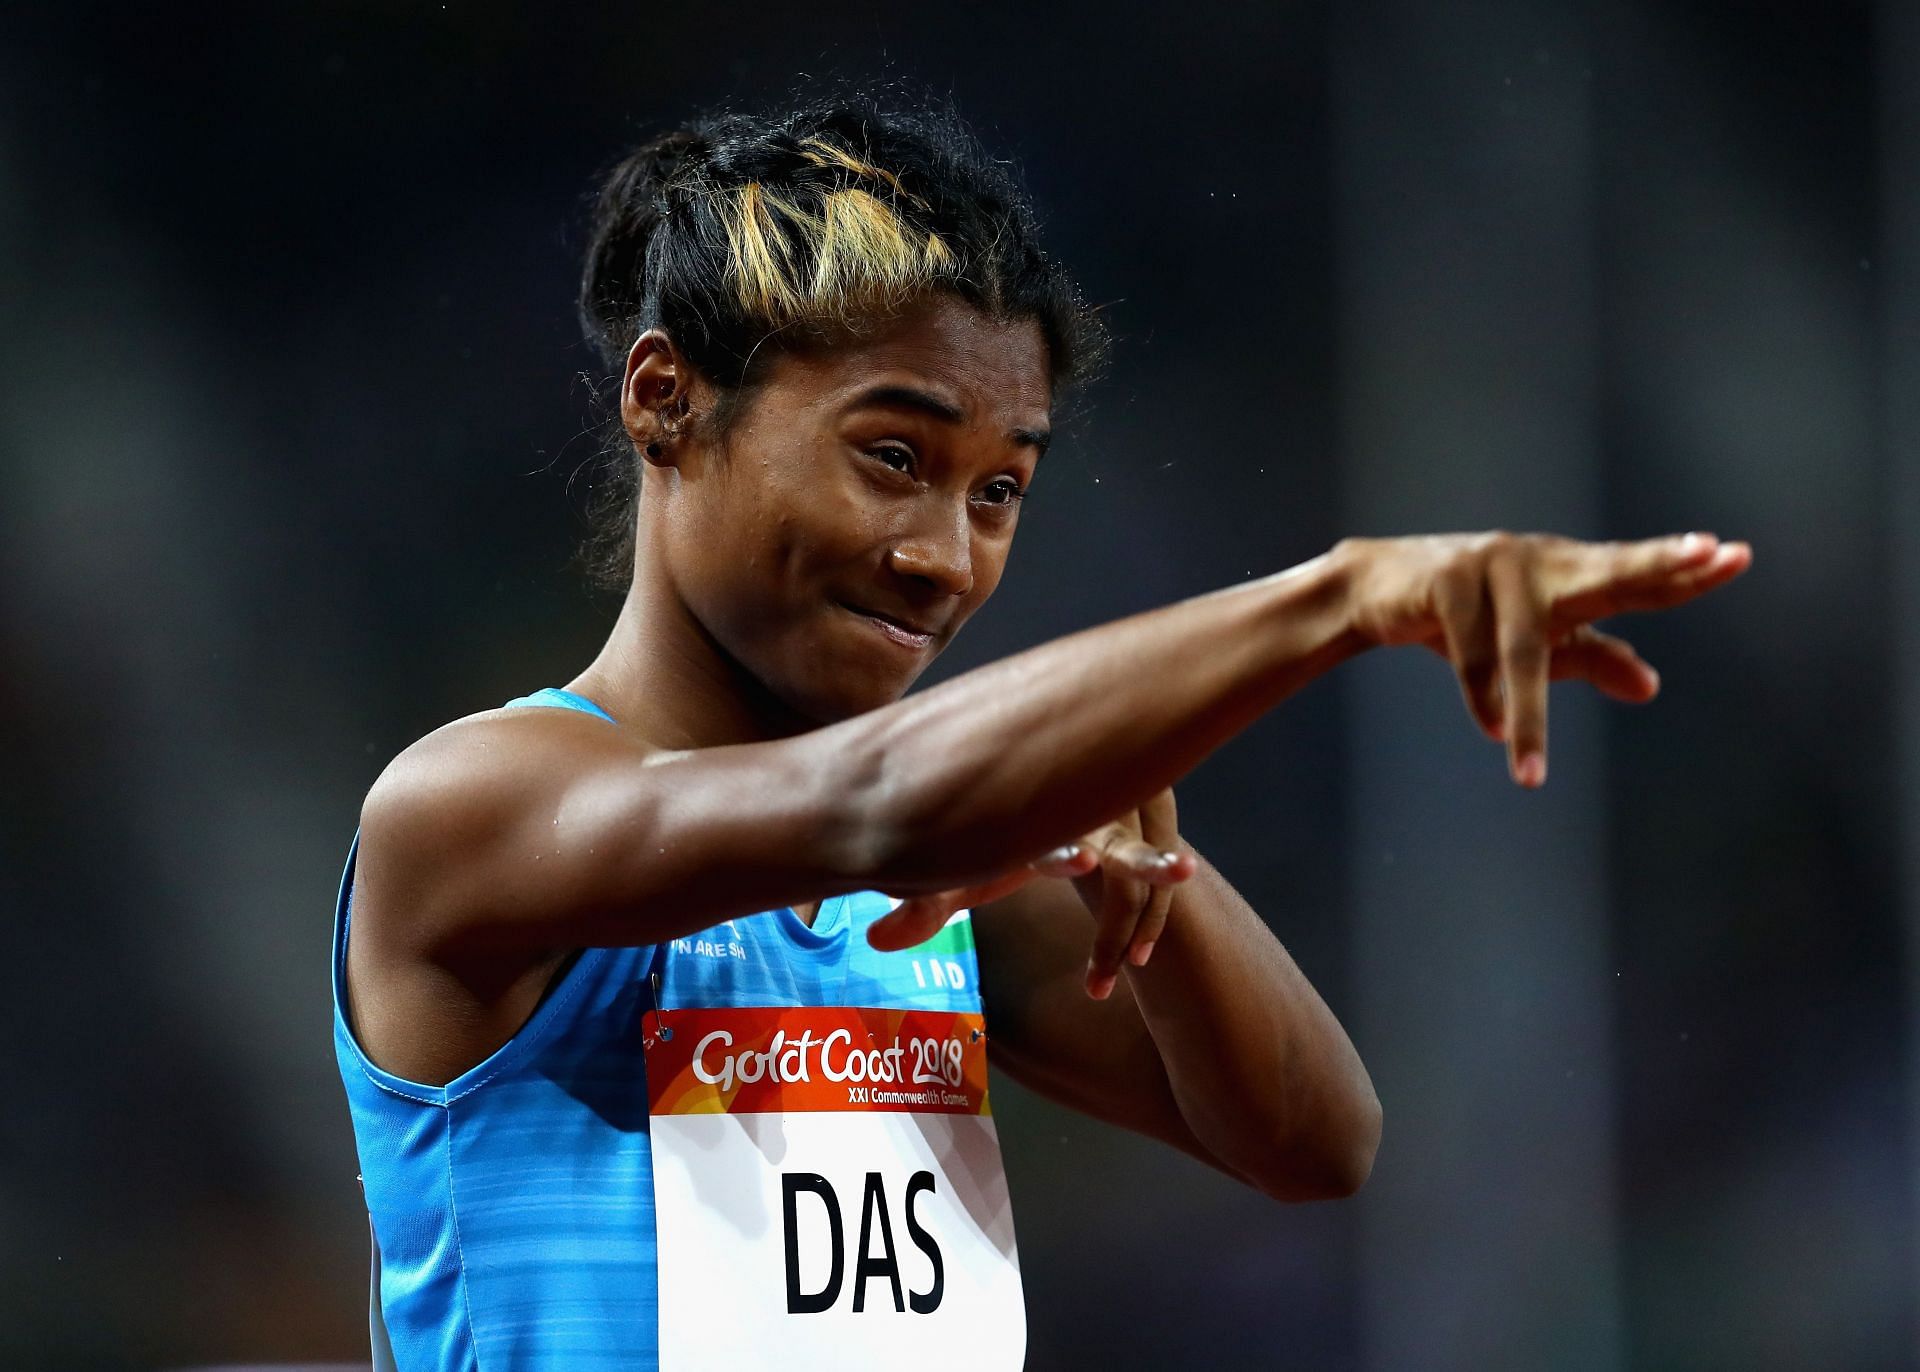 Hima Das failed to win a medal at the Indian Grand Prix